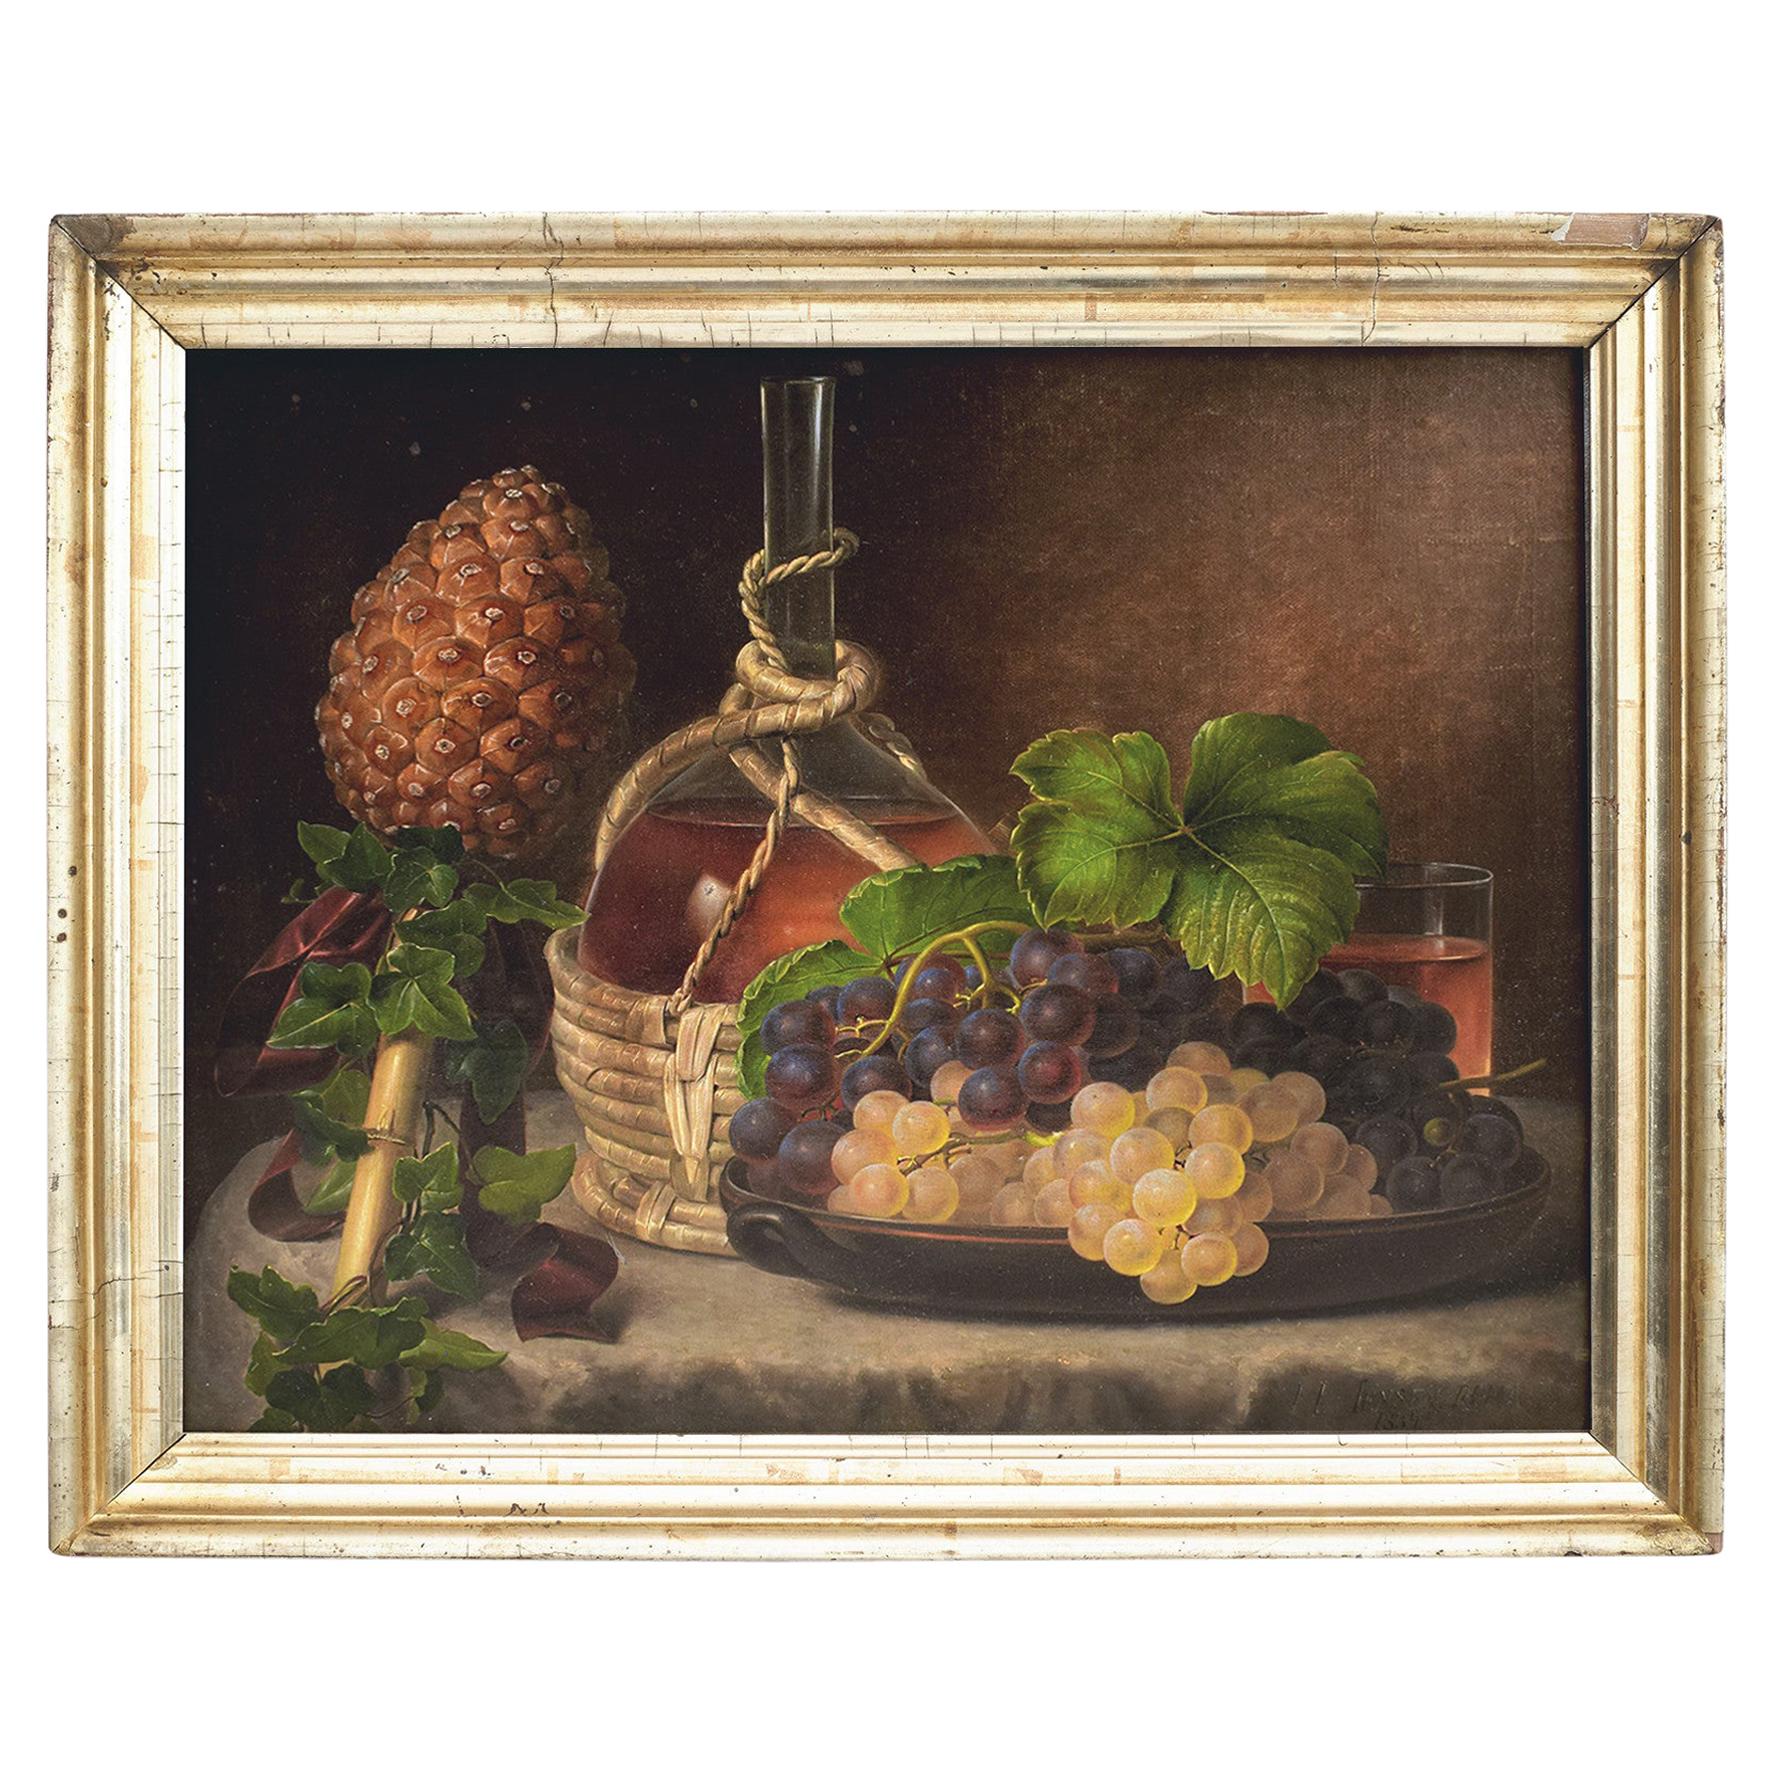 I.L. Jensen, Painting Still Life with Grapes and Wine on a Table, Signed